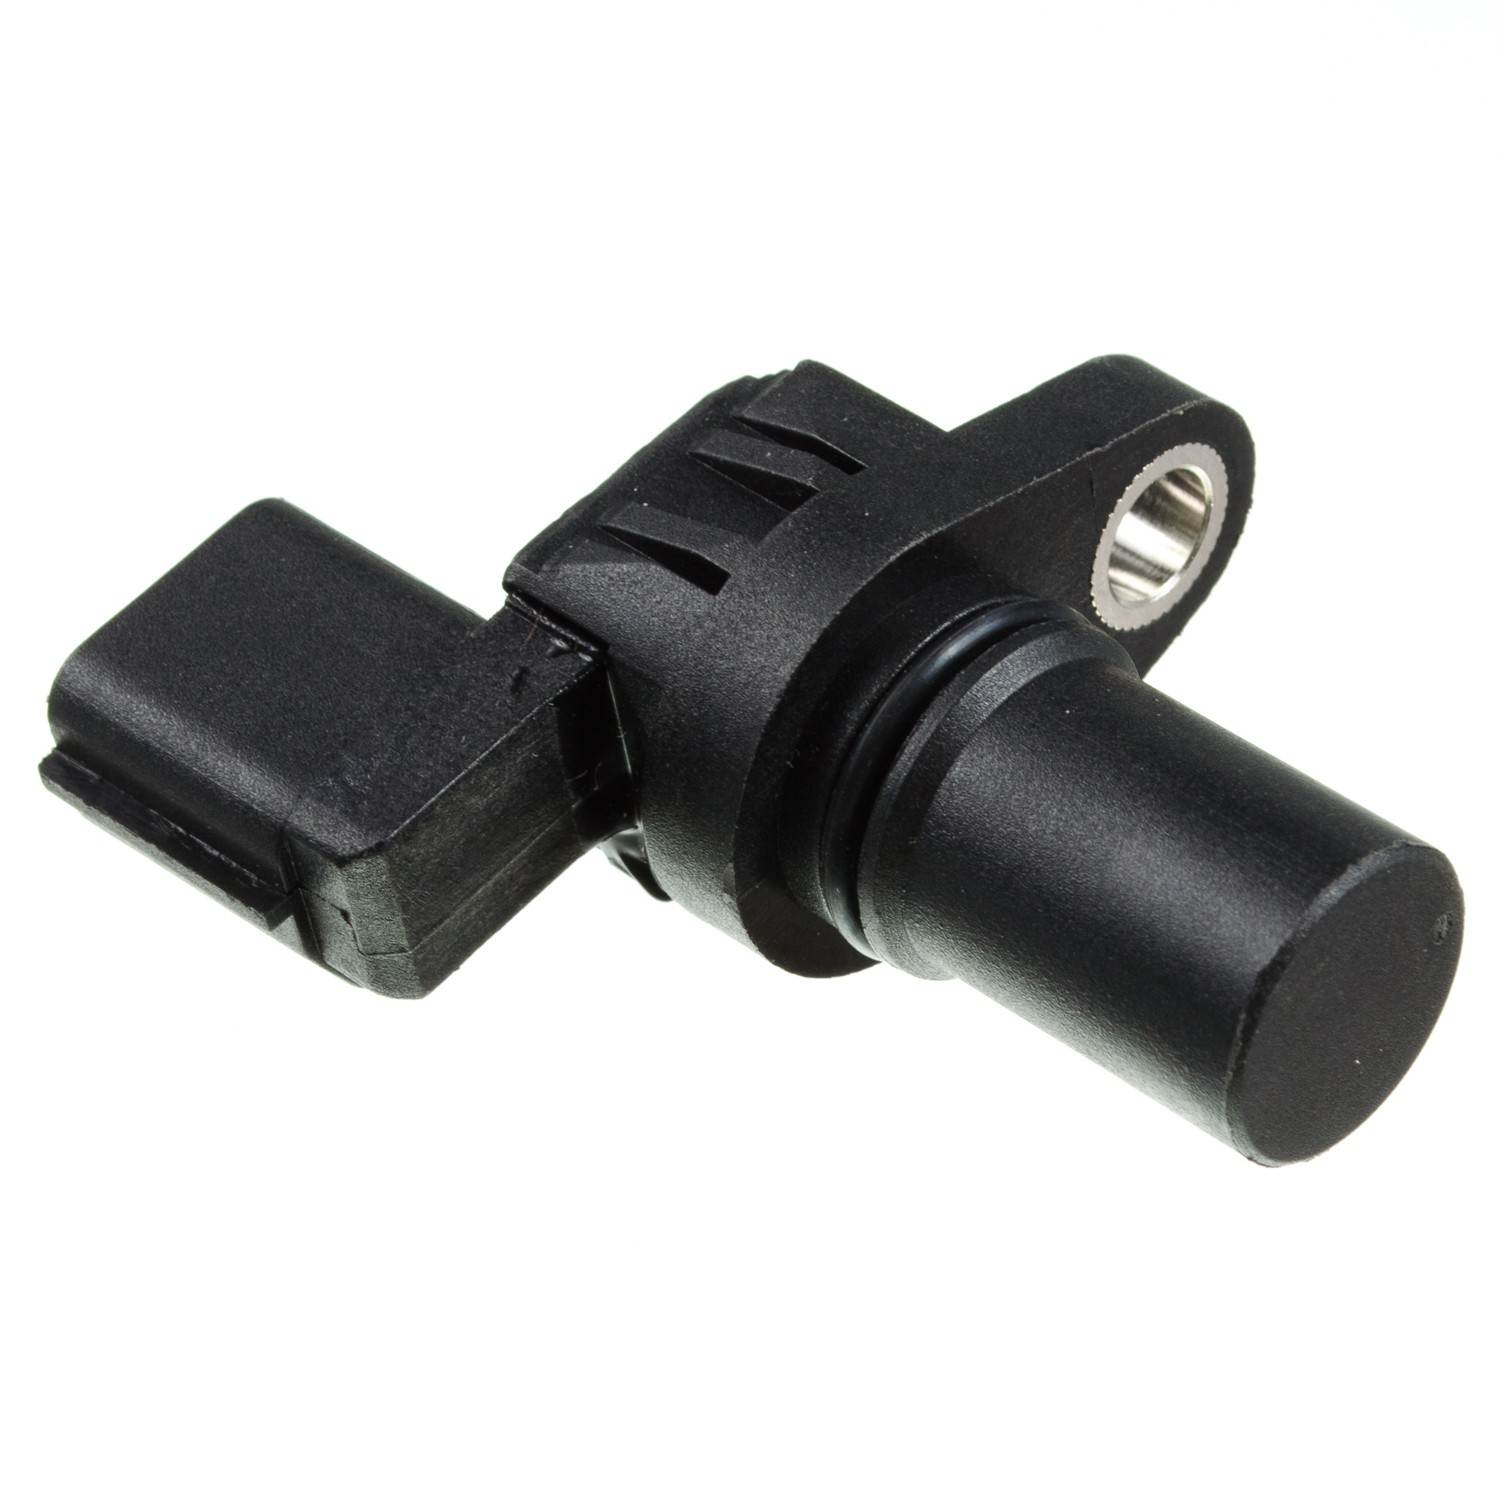 Back View of Vehicle Speed Sensor HOLSTEIN 2ABS1901